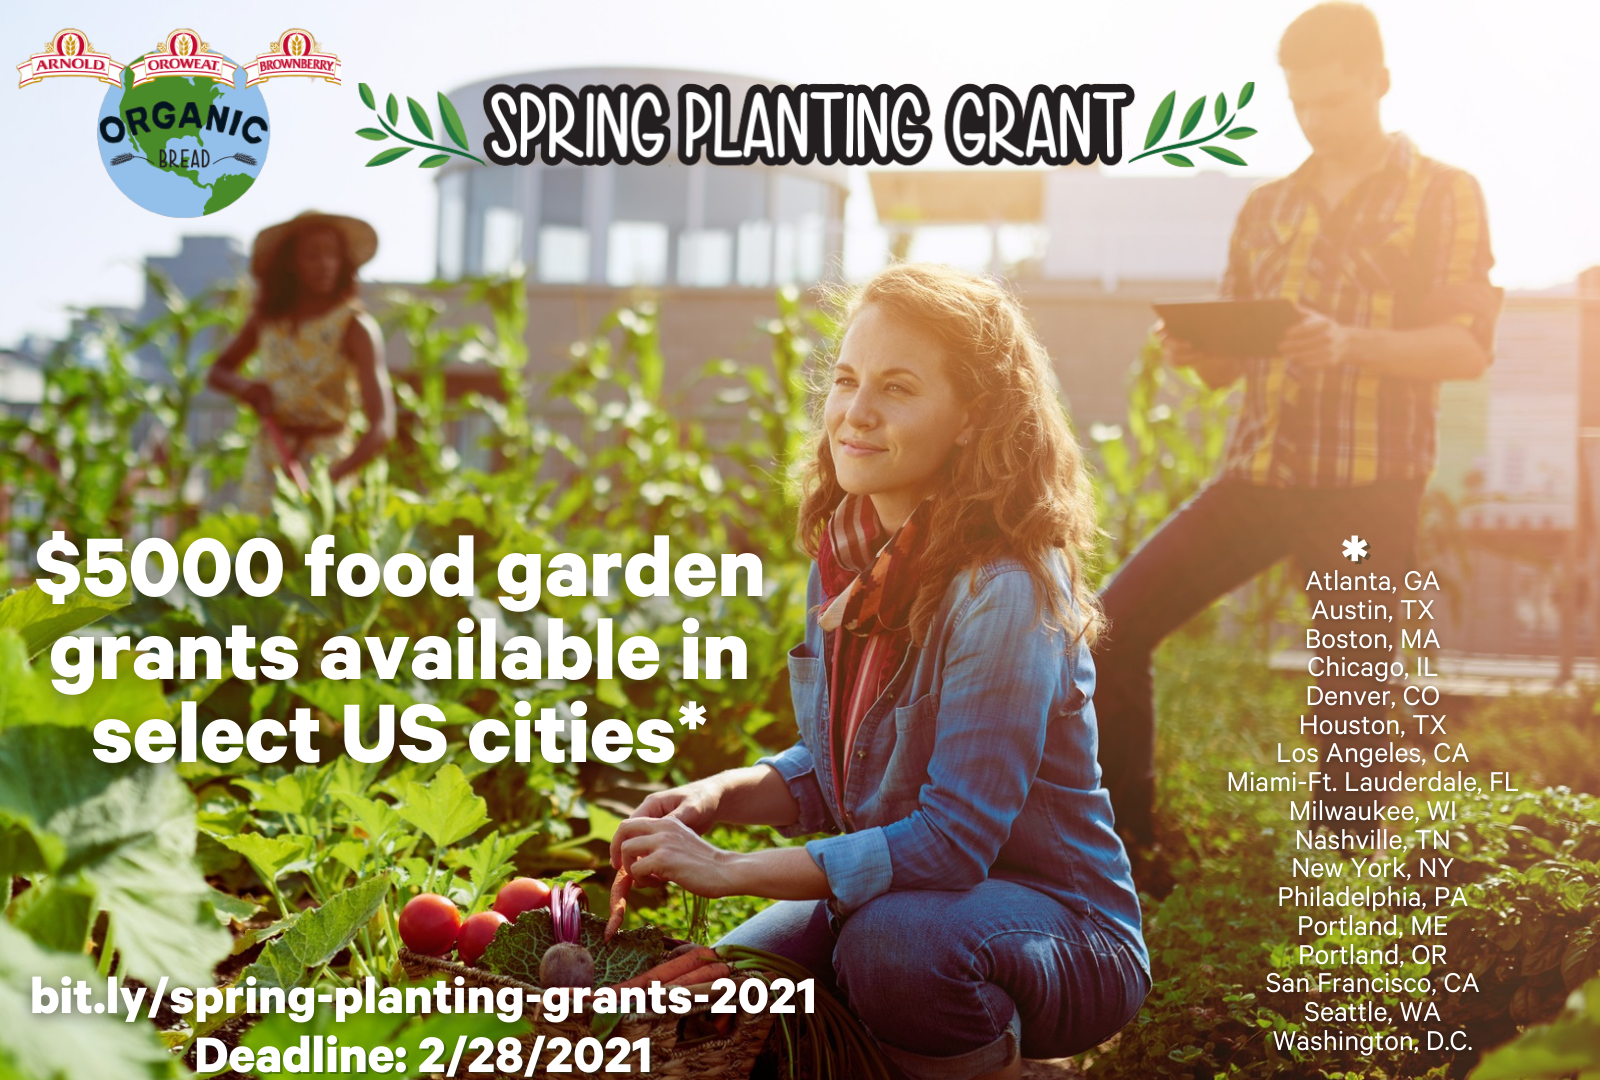 Grant Opportunity for Community Garden Projects